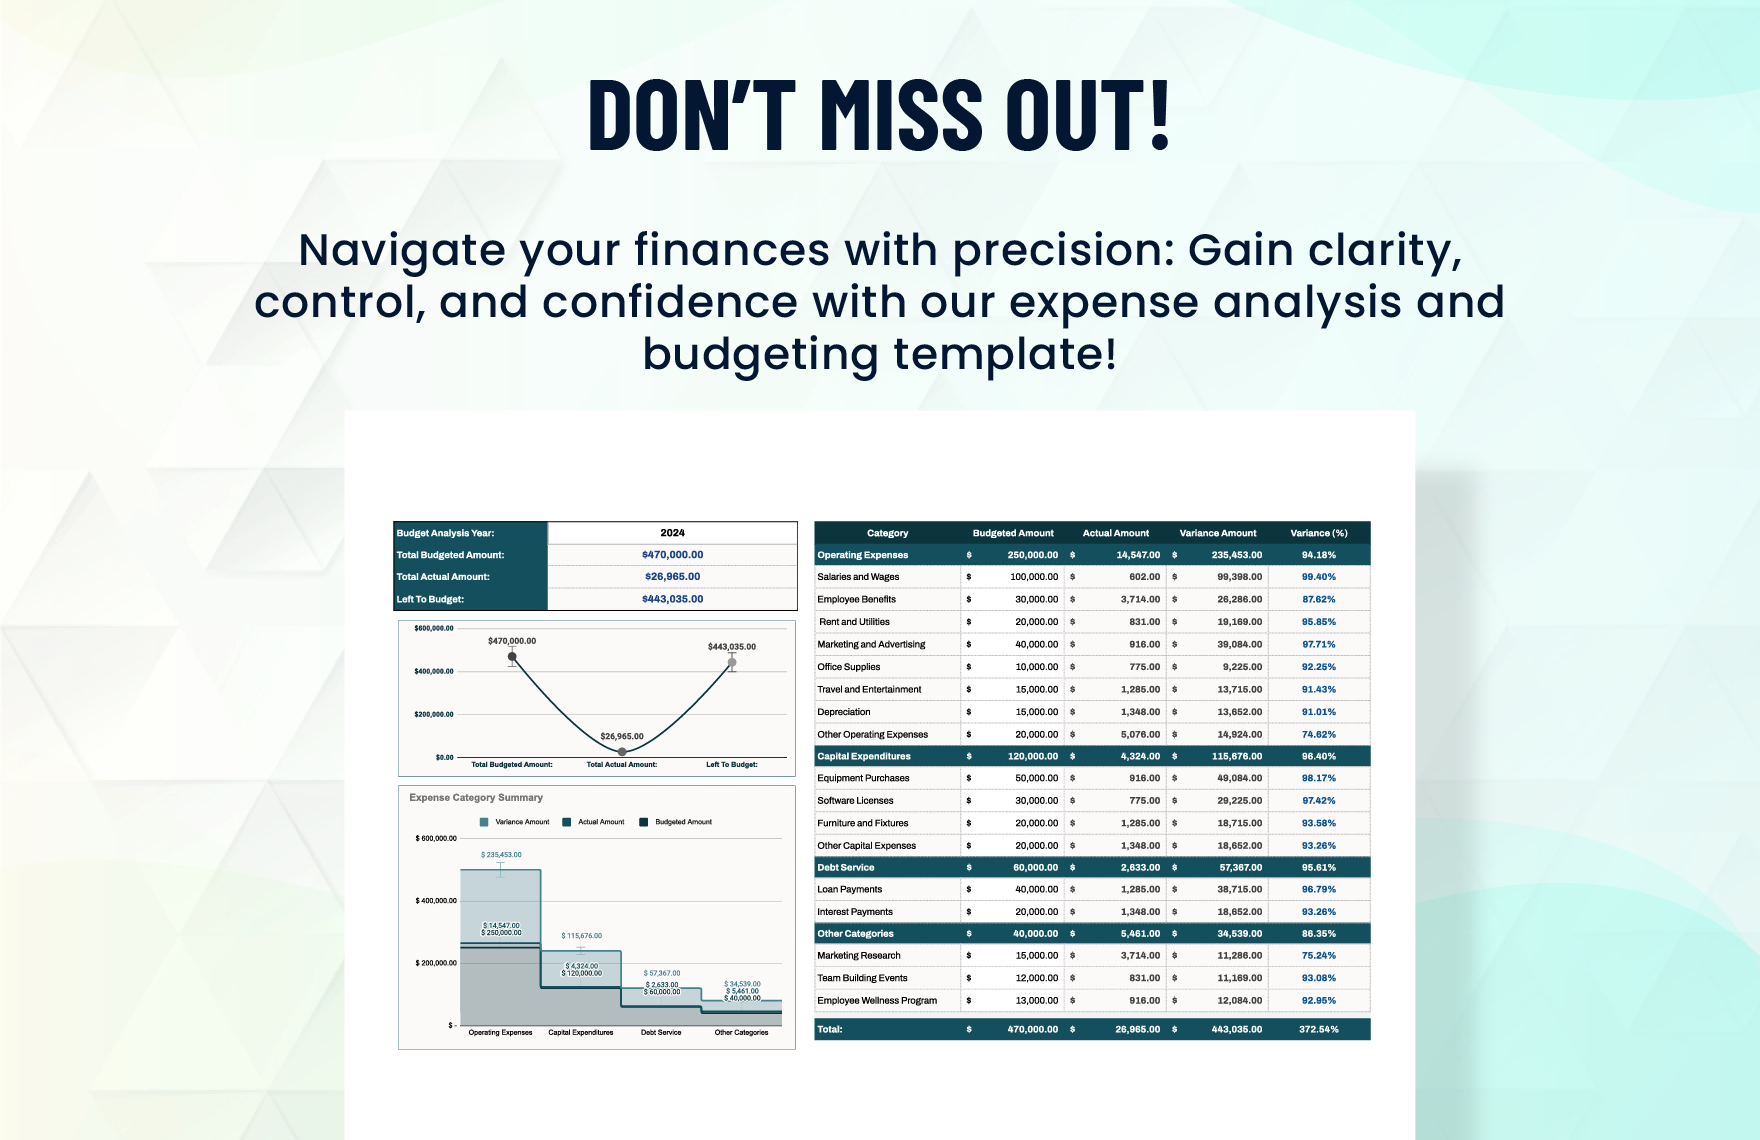 Finance Expense Analysis and Budgeting Template